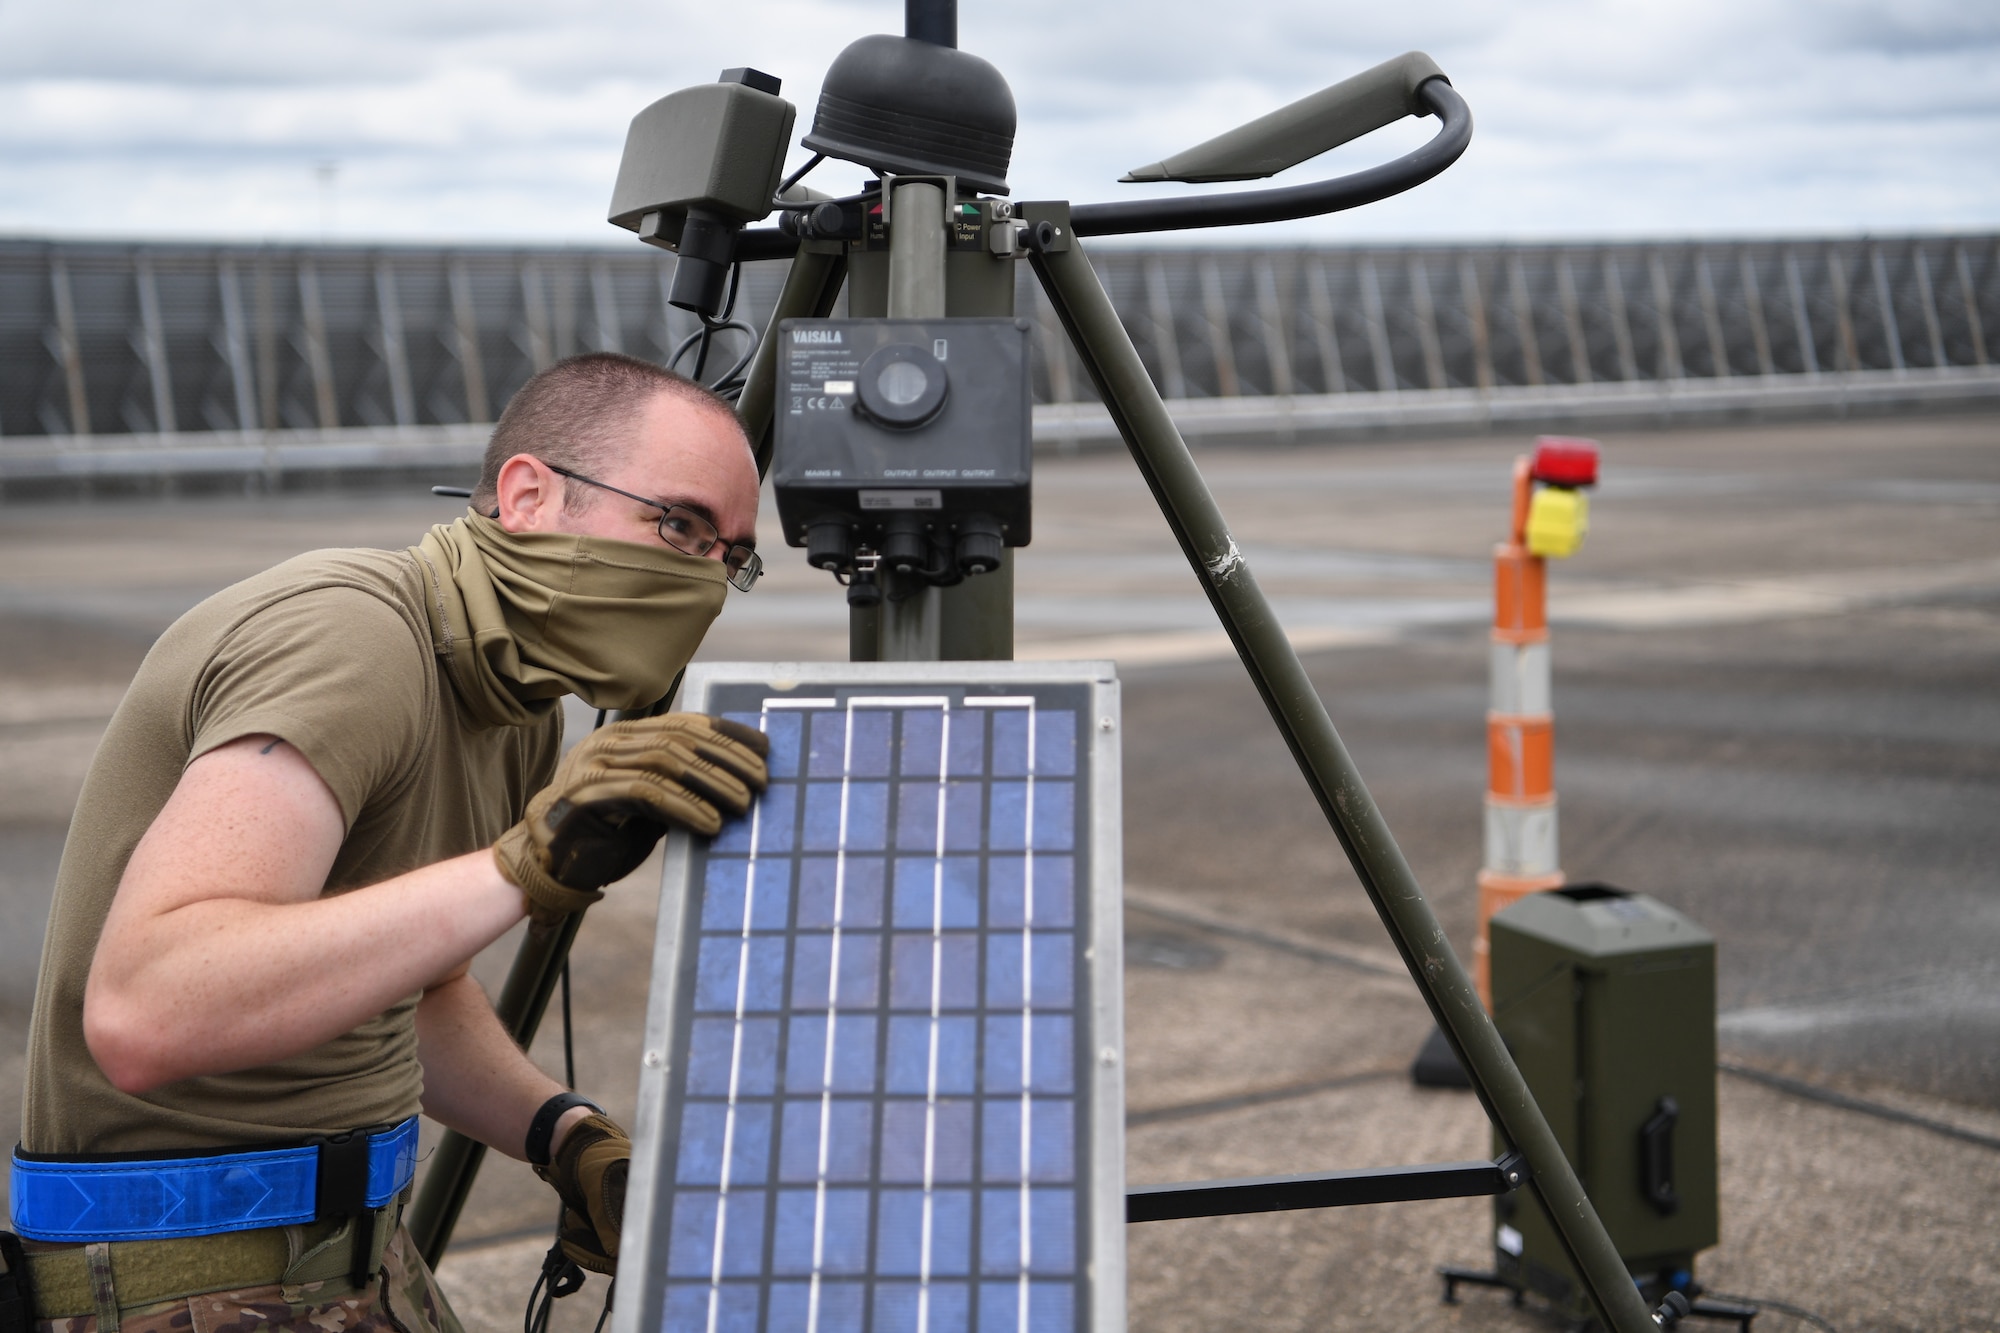 Master Sgt. James Gragg, 321st Contingency Response Squadron weather technician, sets up a tactical meteorological observation system during Exercise Swamp Devil at Lake Charles, Louisiana, July 26, 2020. The TMQ-53 is used to observe weather elements and relay information to pilots in real time. (U.S. Air Force photo by Tech. Sgt. Luther Mitchell Jr)